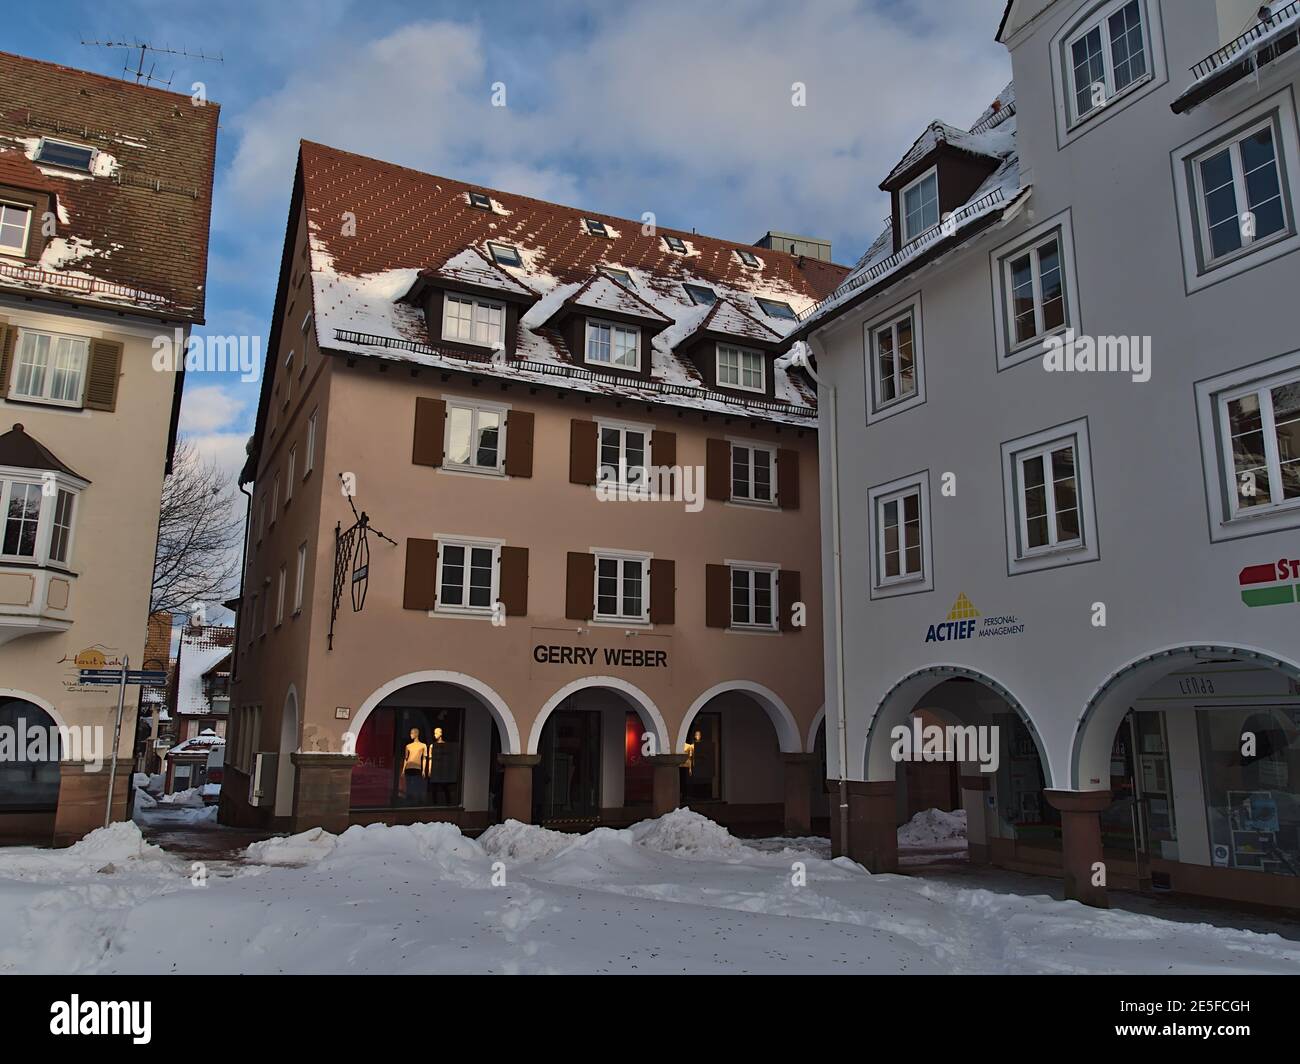 Corner of historic snow-covered market place of Freudenstadt, Black Forest with old buildings, arcades and shops including a Gerry Weber branch. Stock Photo